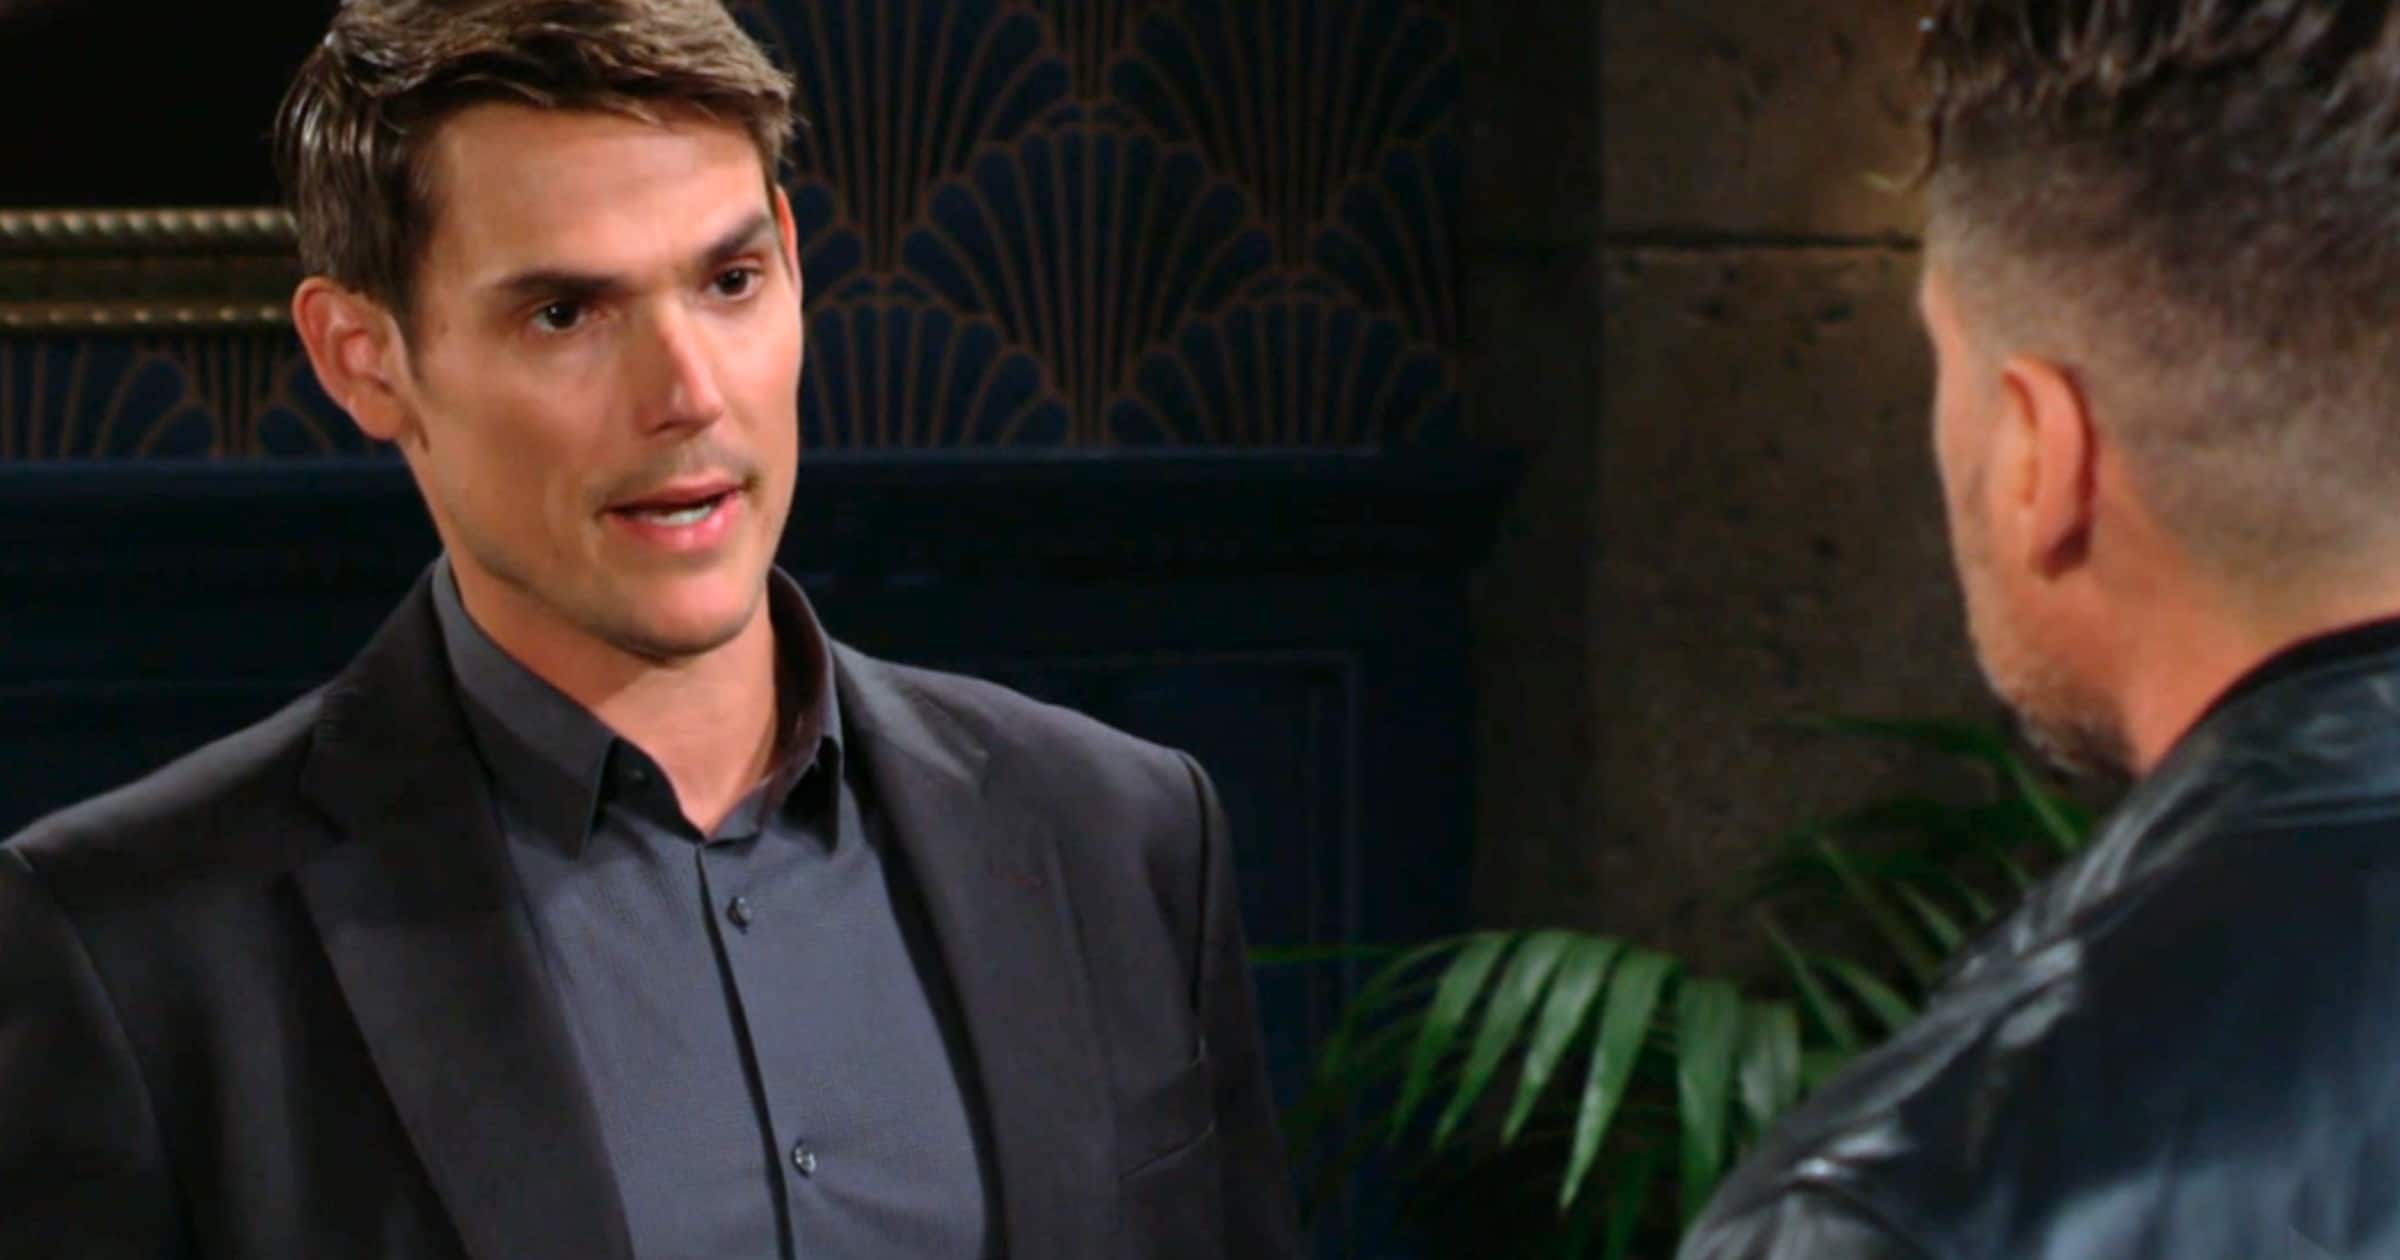 The Young and the Restless - Oct 24 - Adam and Nick